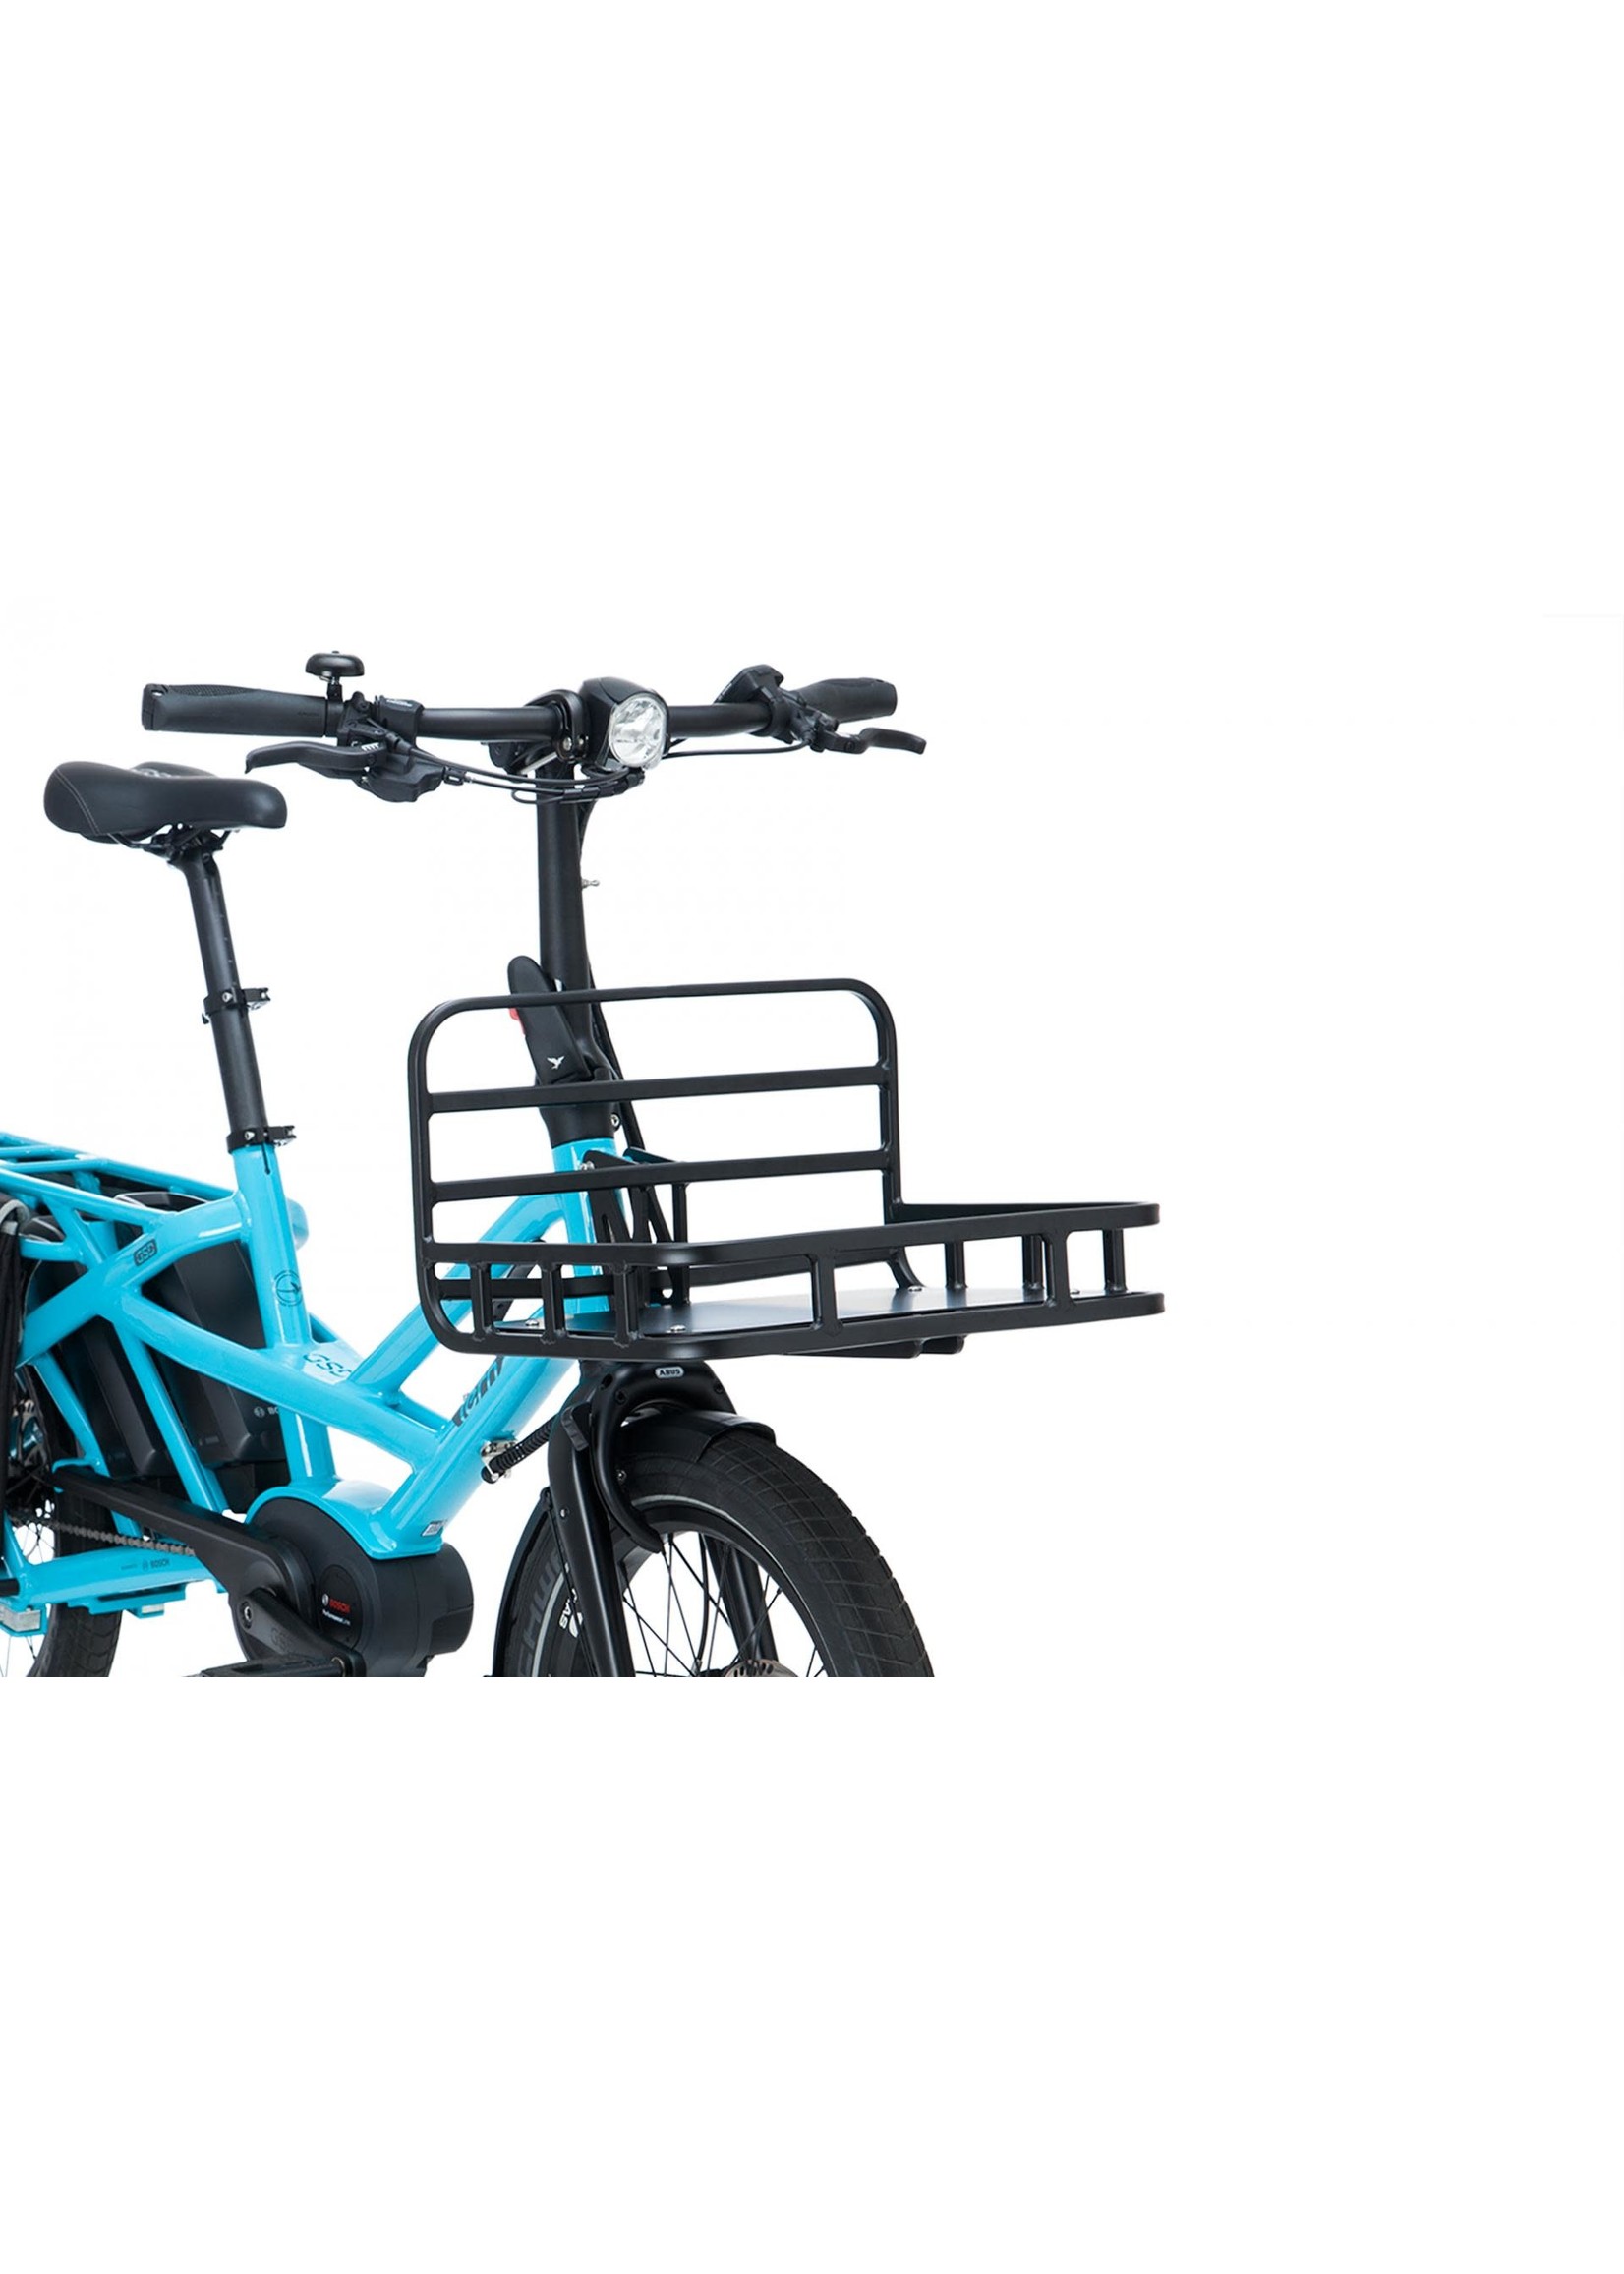 Tern eBikes Tern HSD & GSD Accessory Transporteur Front Cargo Rack carries up to 20kg